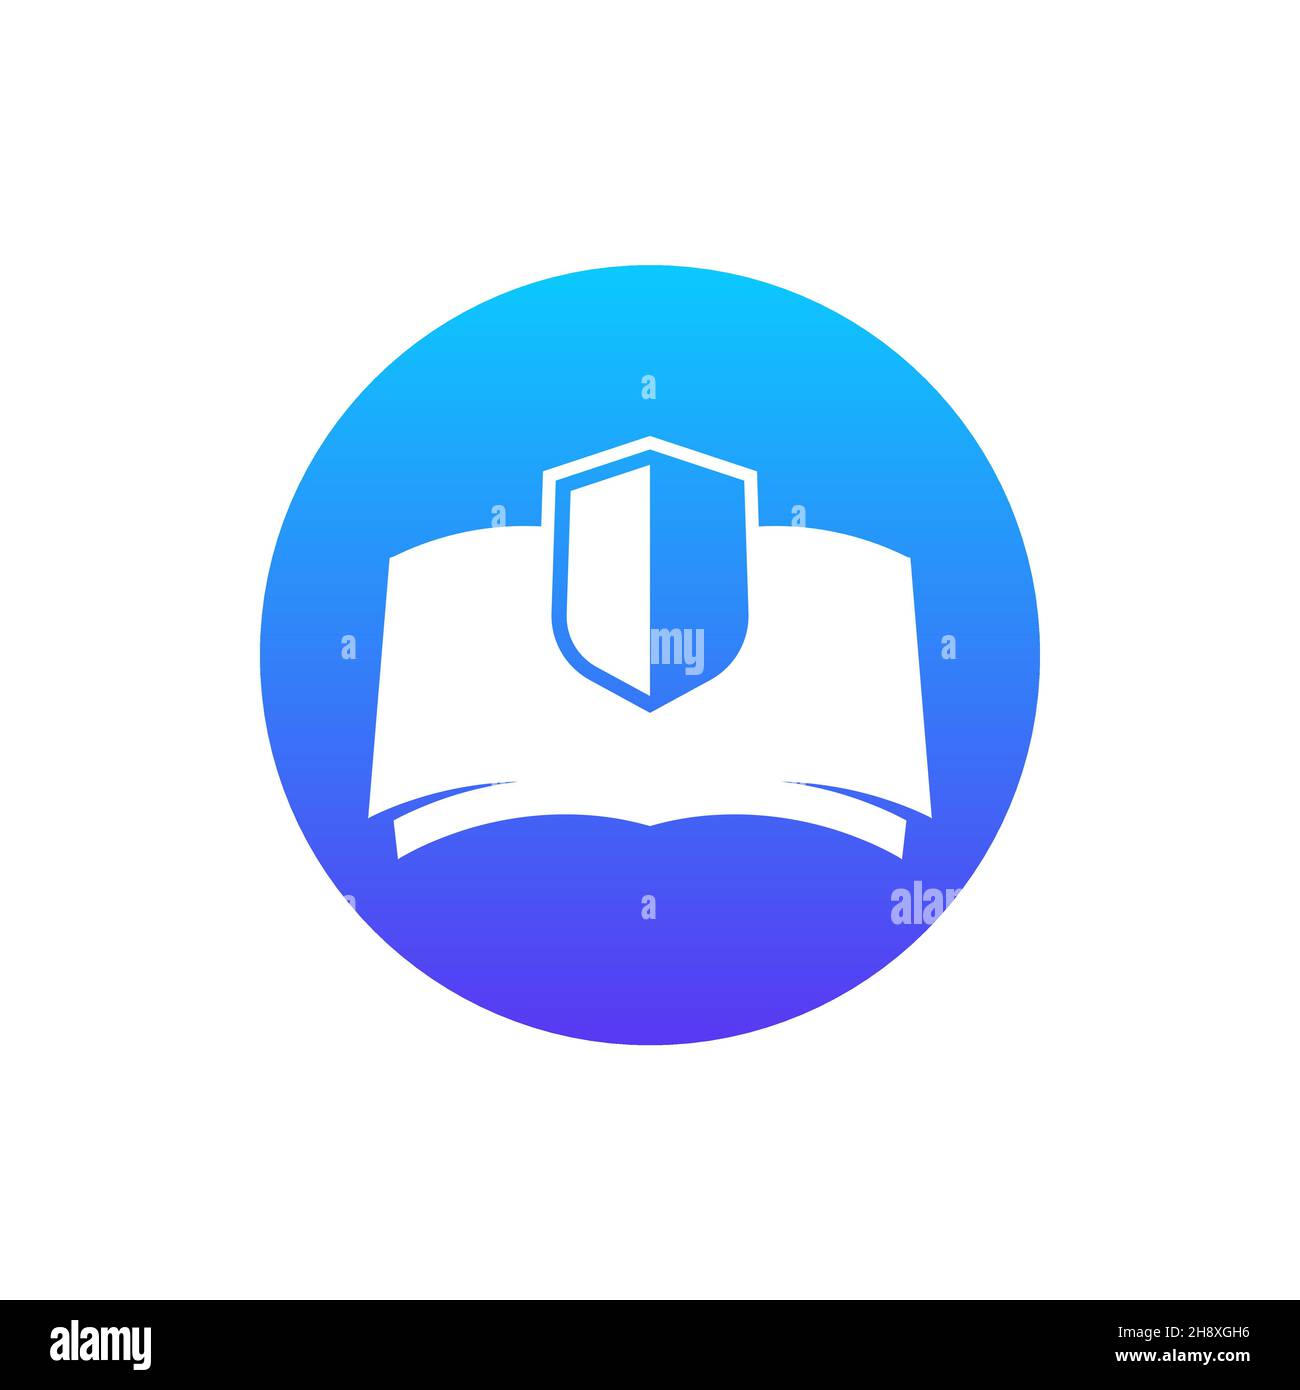 Security manual, guide or instructions icon Stock Vector